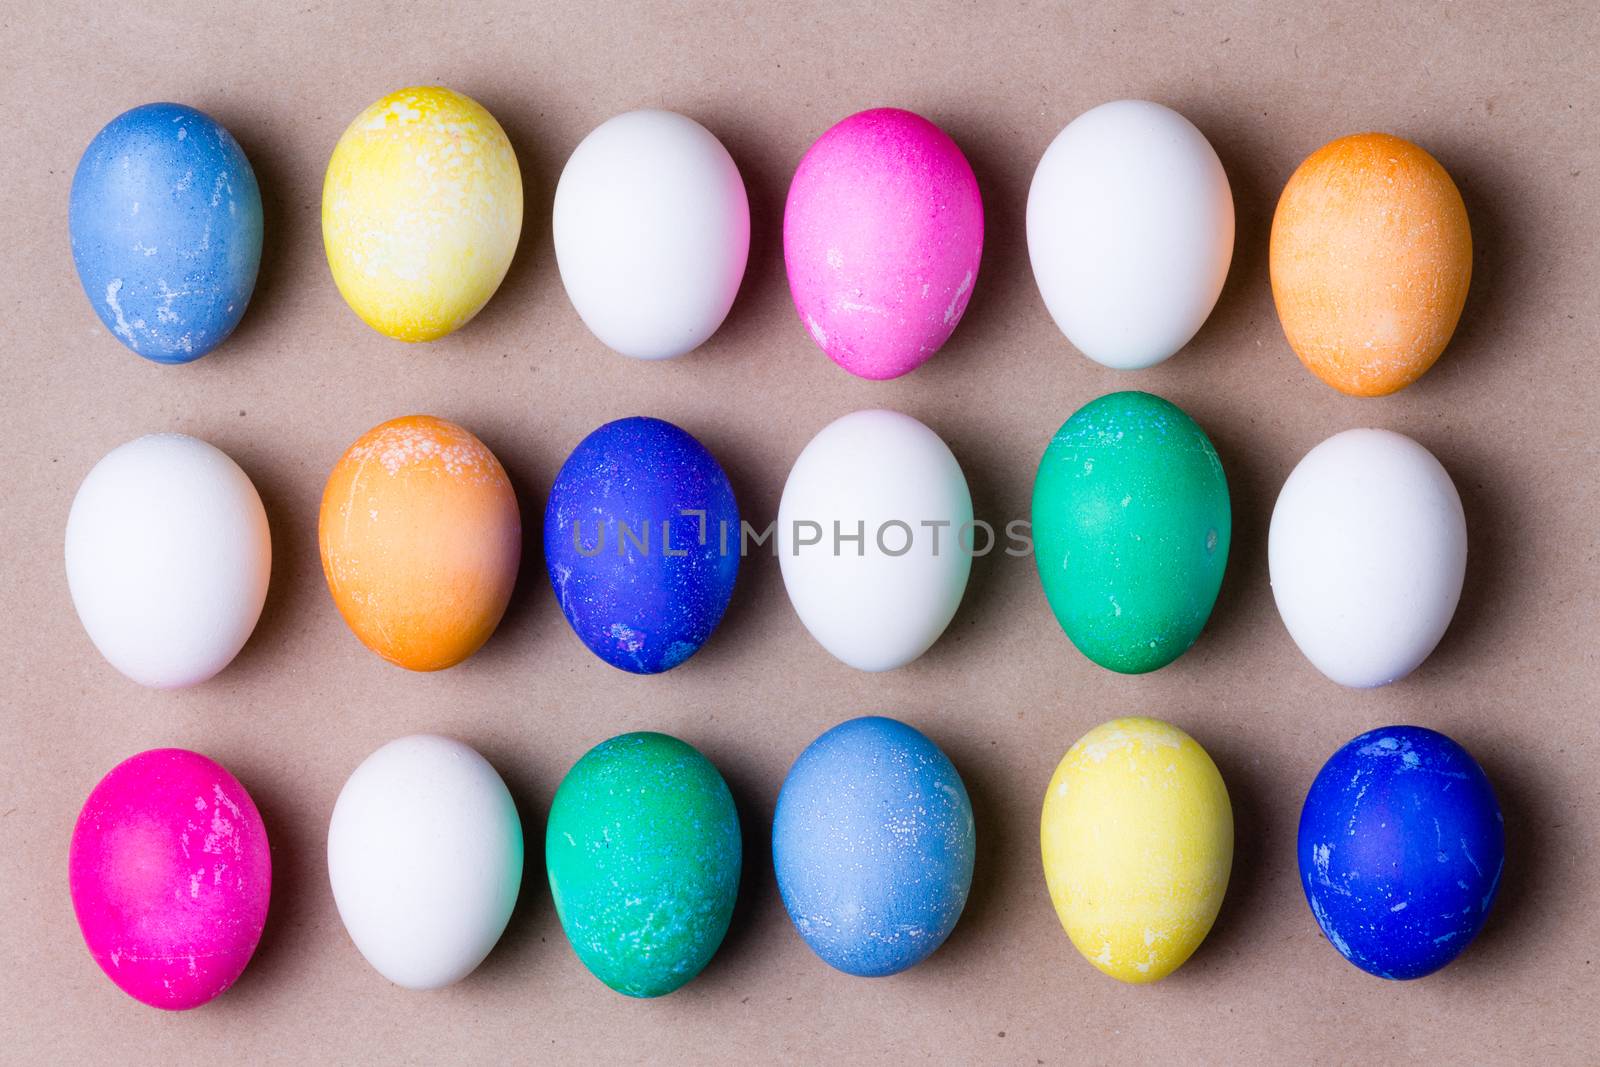 Neat arrangement of colorful dyed Easter eggs by coskun